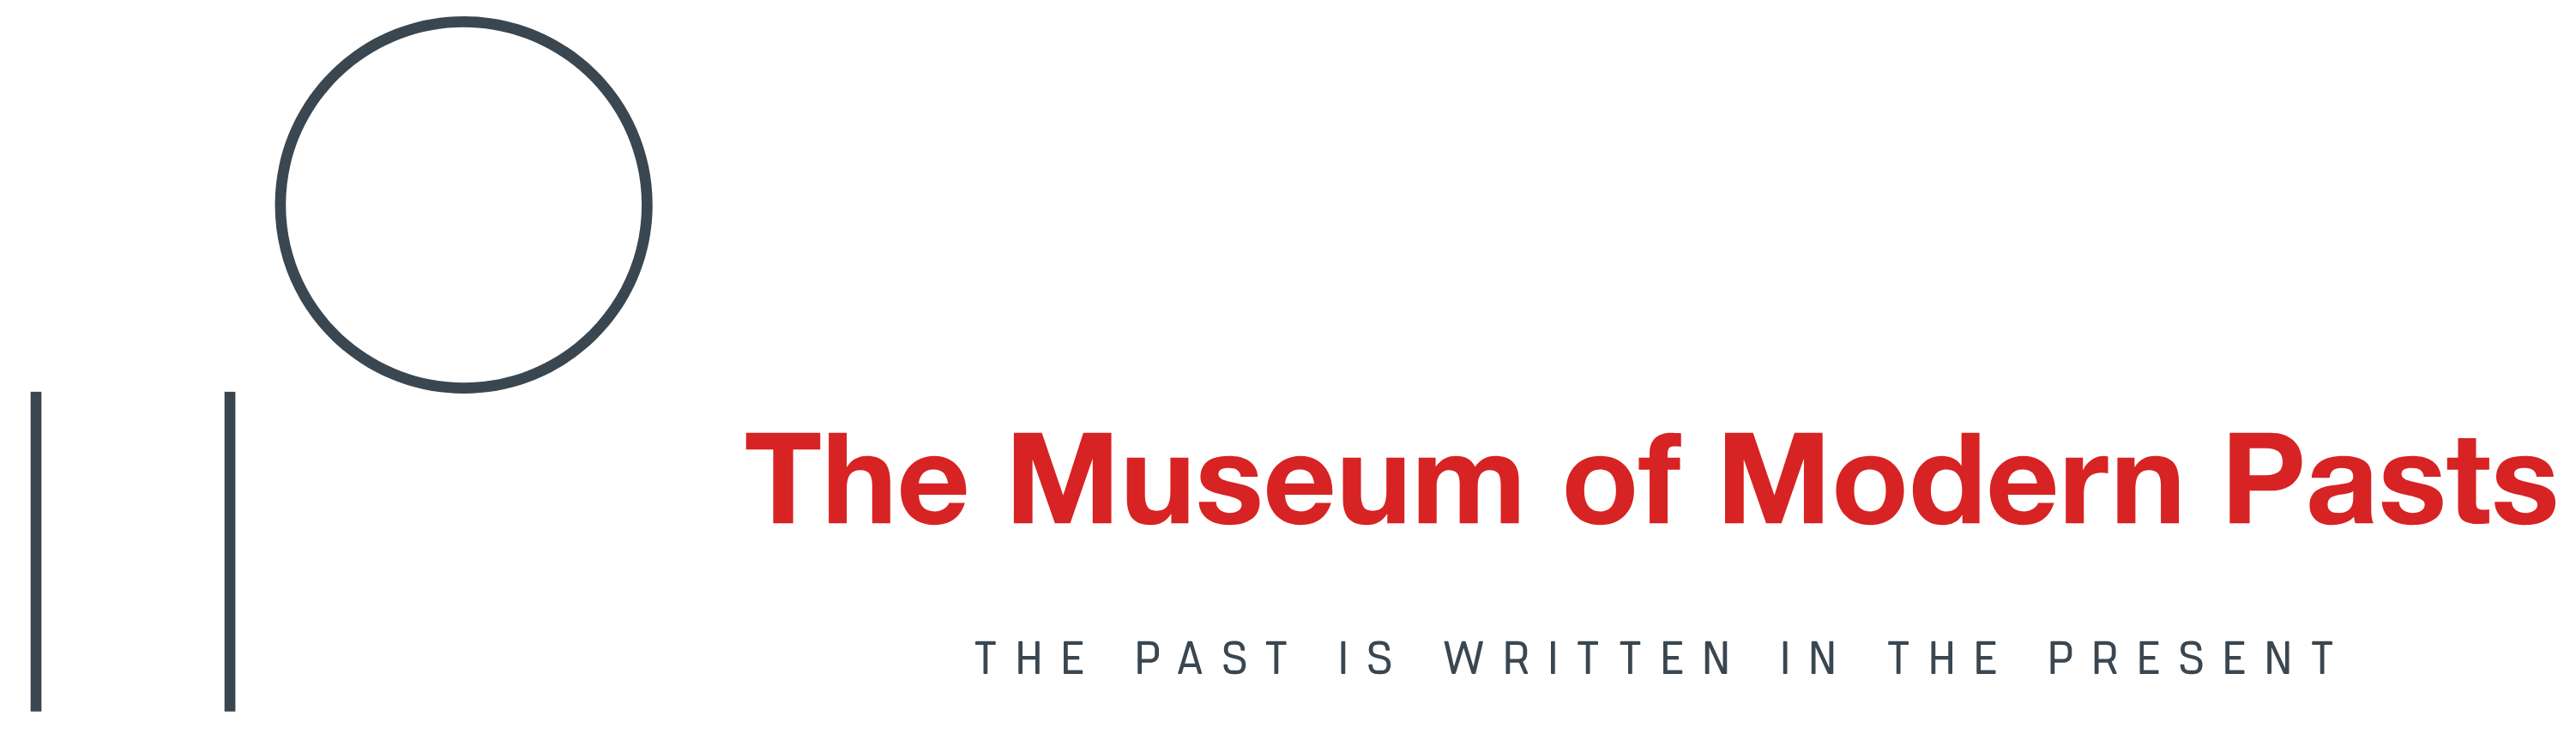 The Museum of Modern Pasts